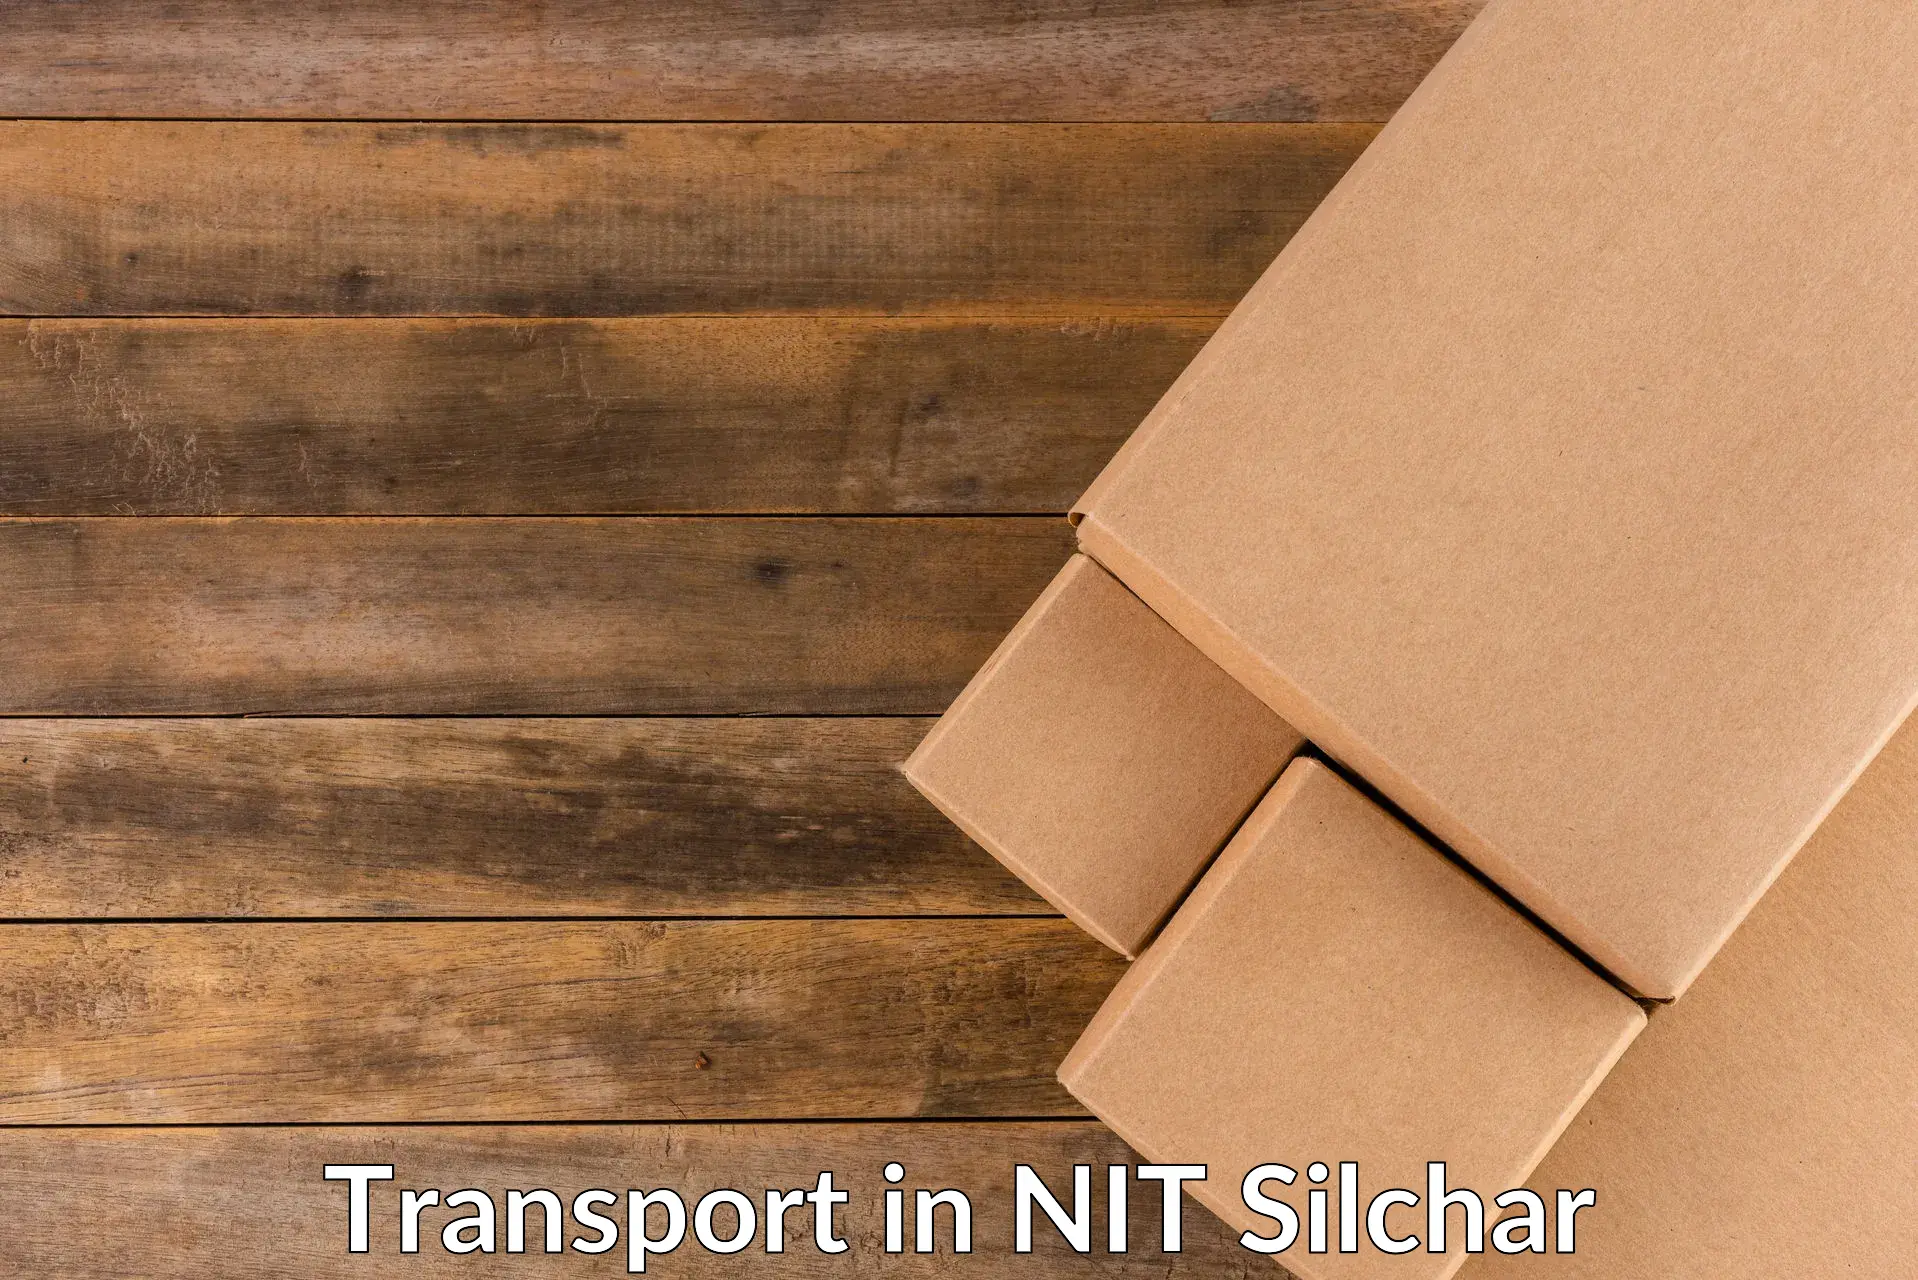 Shipping services in NIT Silchar